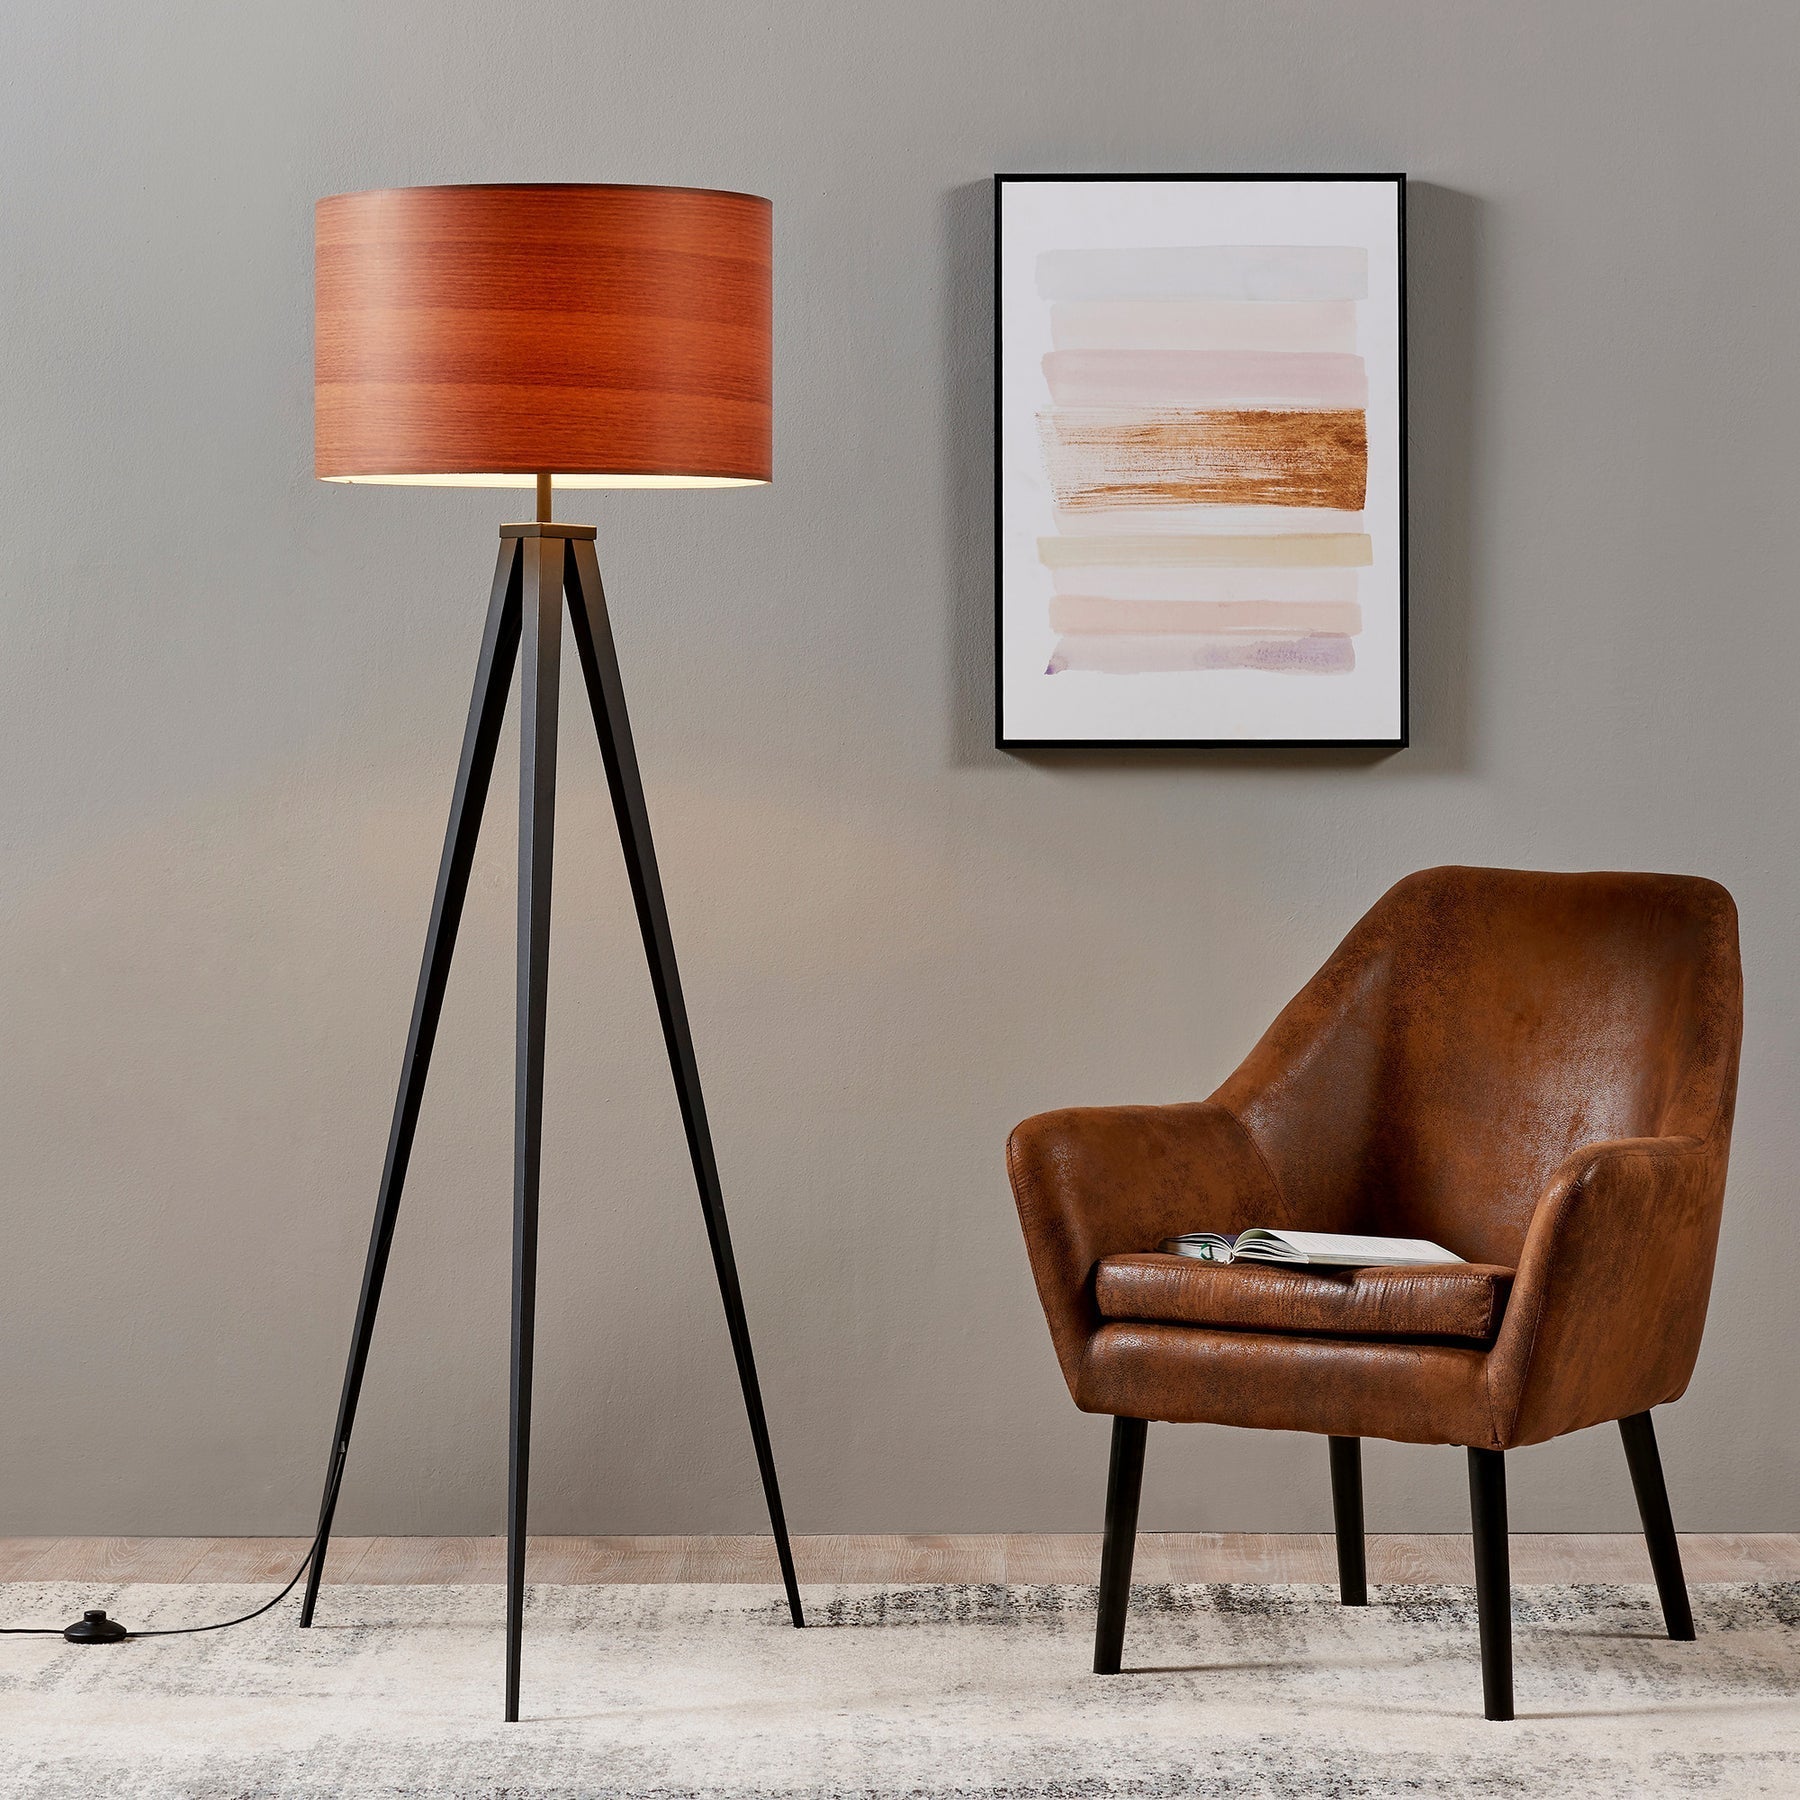 A Teamson set up with a beautiful leather chair and a tripod floor lamp.